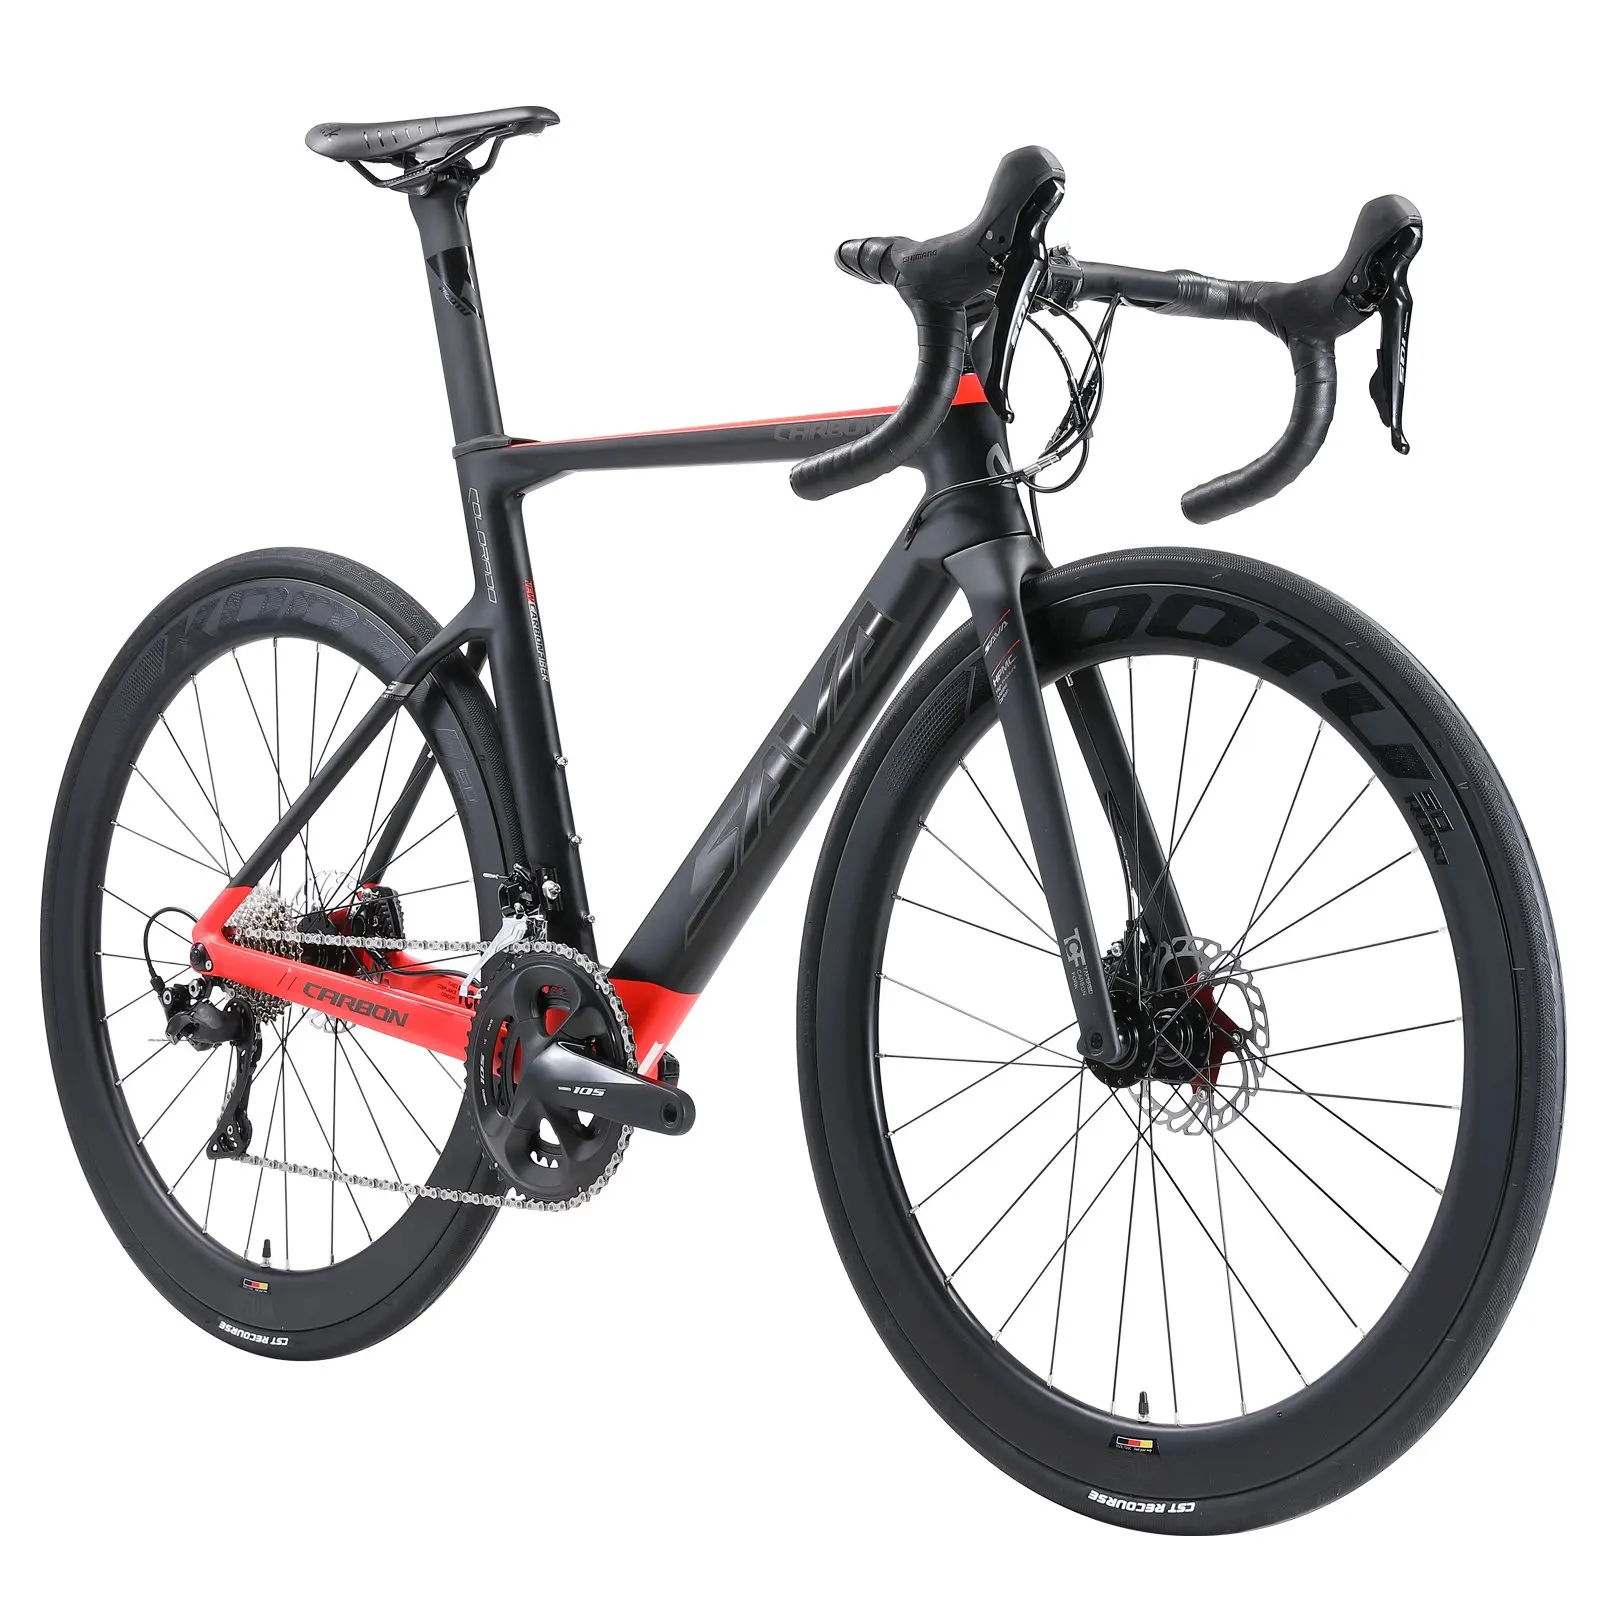 

SAVA New Style HERD6.0 Carbon Fiber Road Bike 700C Bicycle with 105 R7000 22S Carbon Wheelset Seatpost, Black red/black green